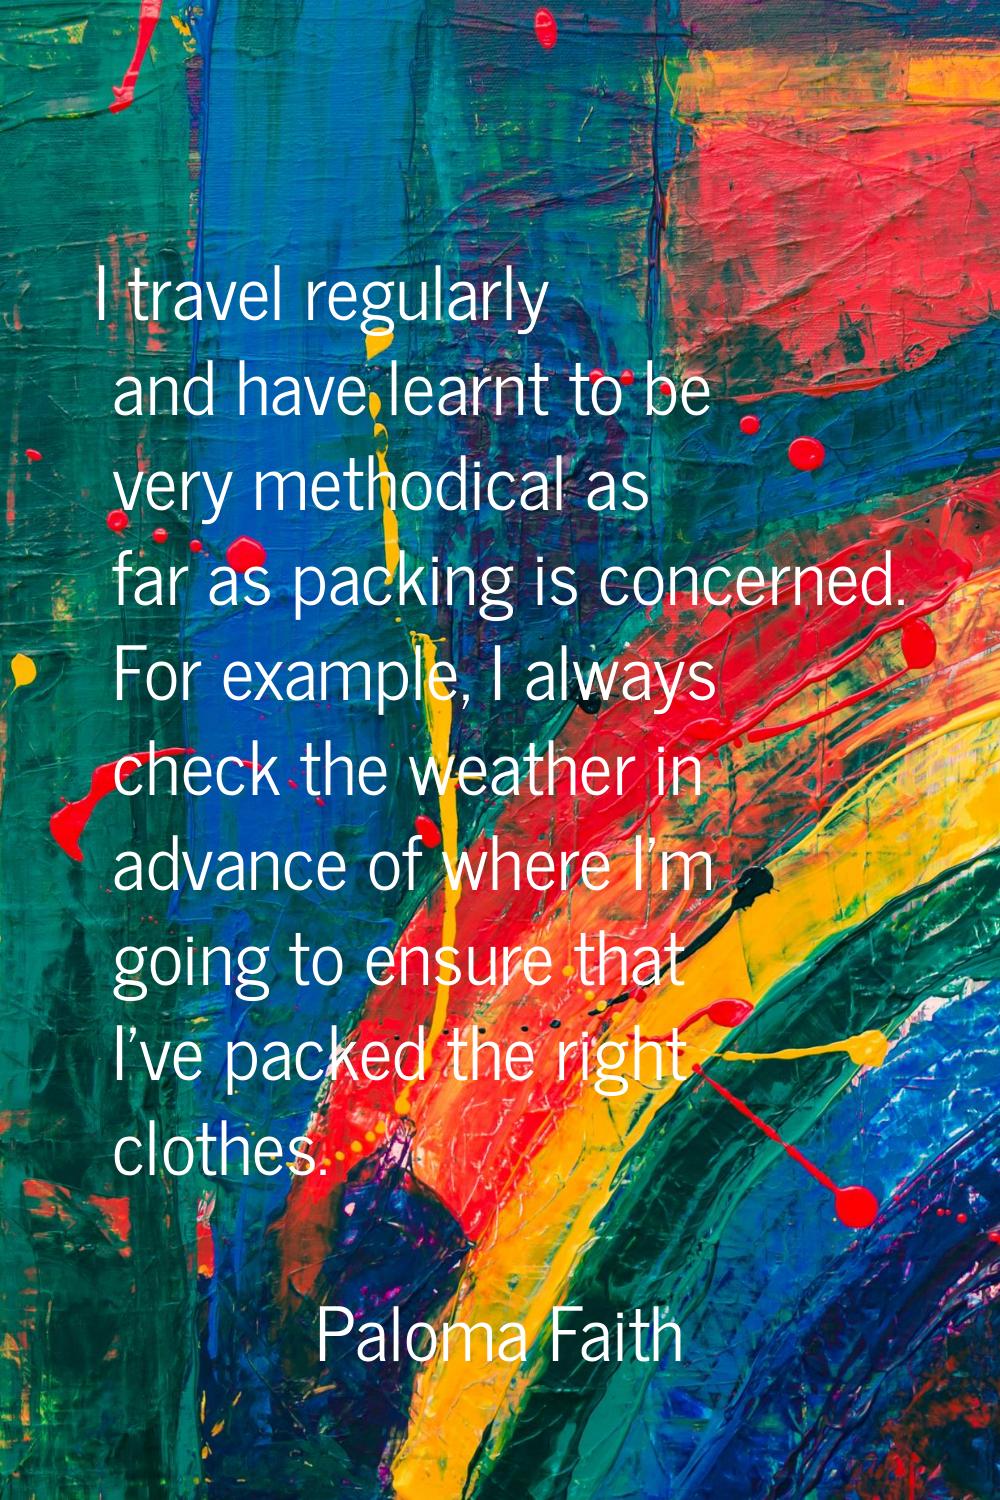 I travel regularly and have learnt to be very methodical as far as packing is concerned. For exampl